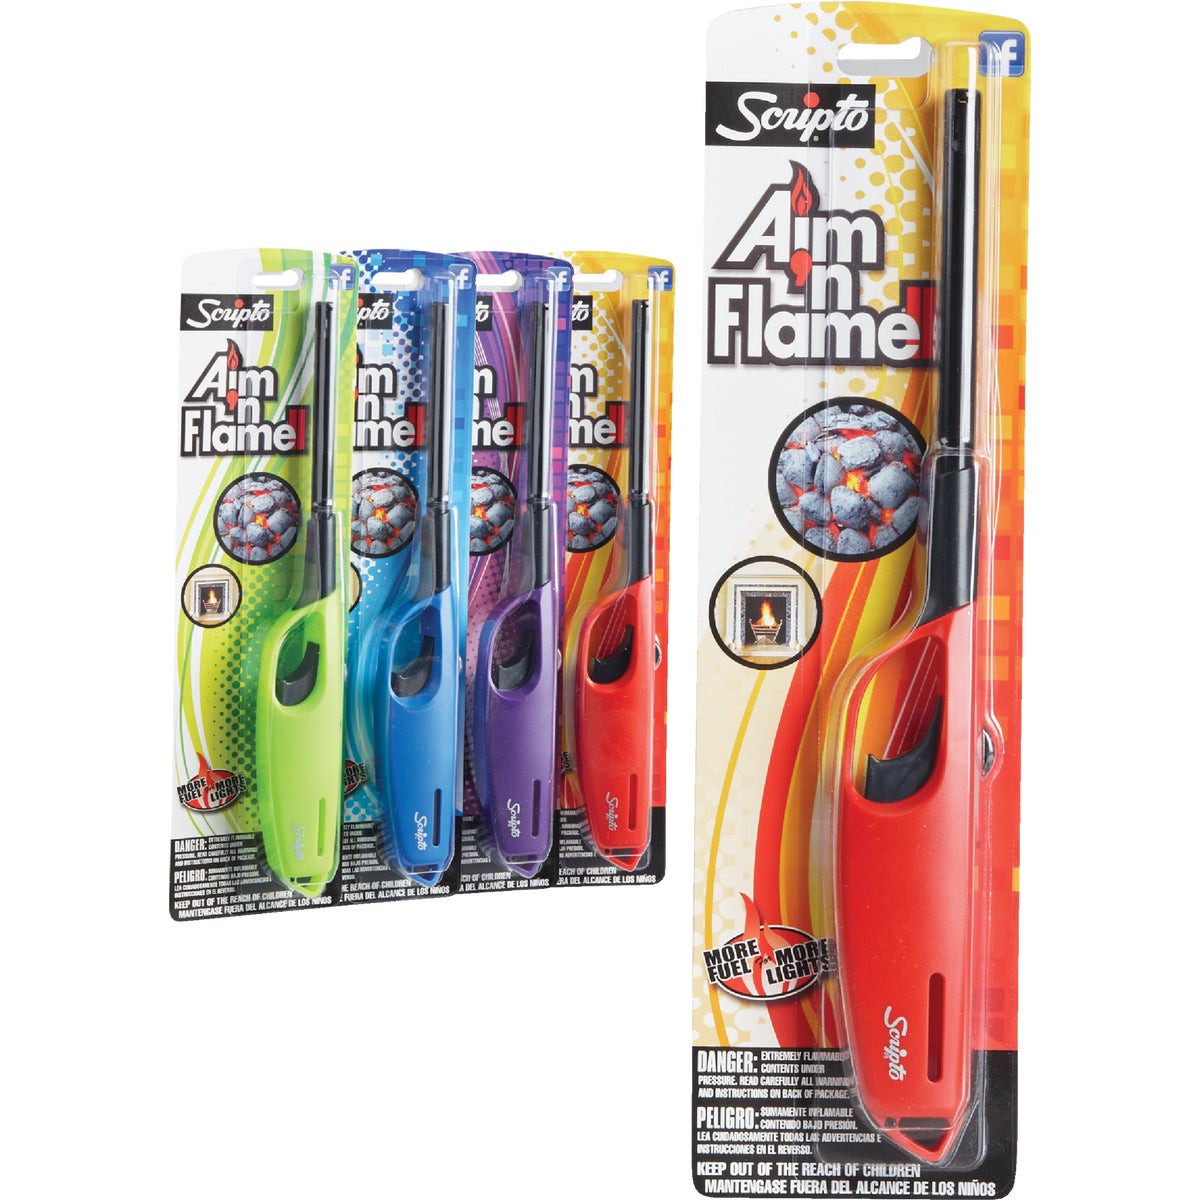 AIMNFLAME MAX  LIGHTER